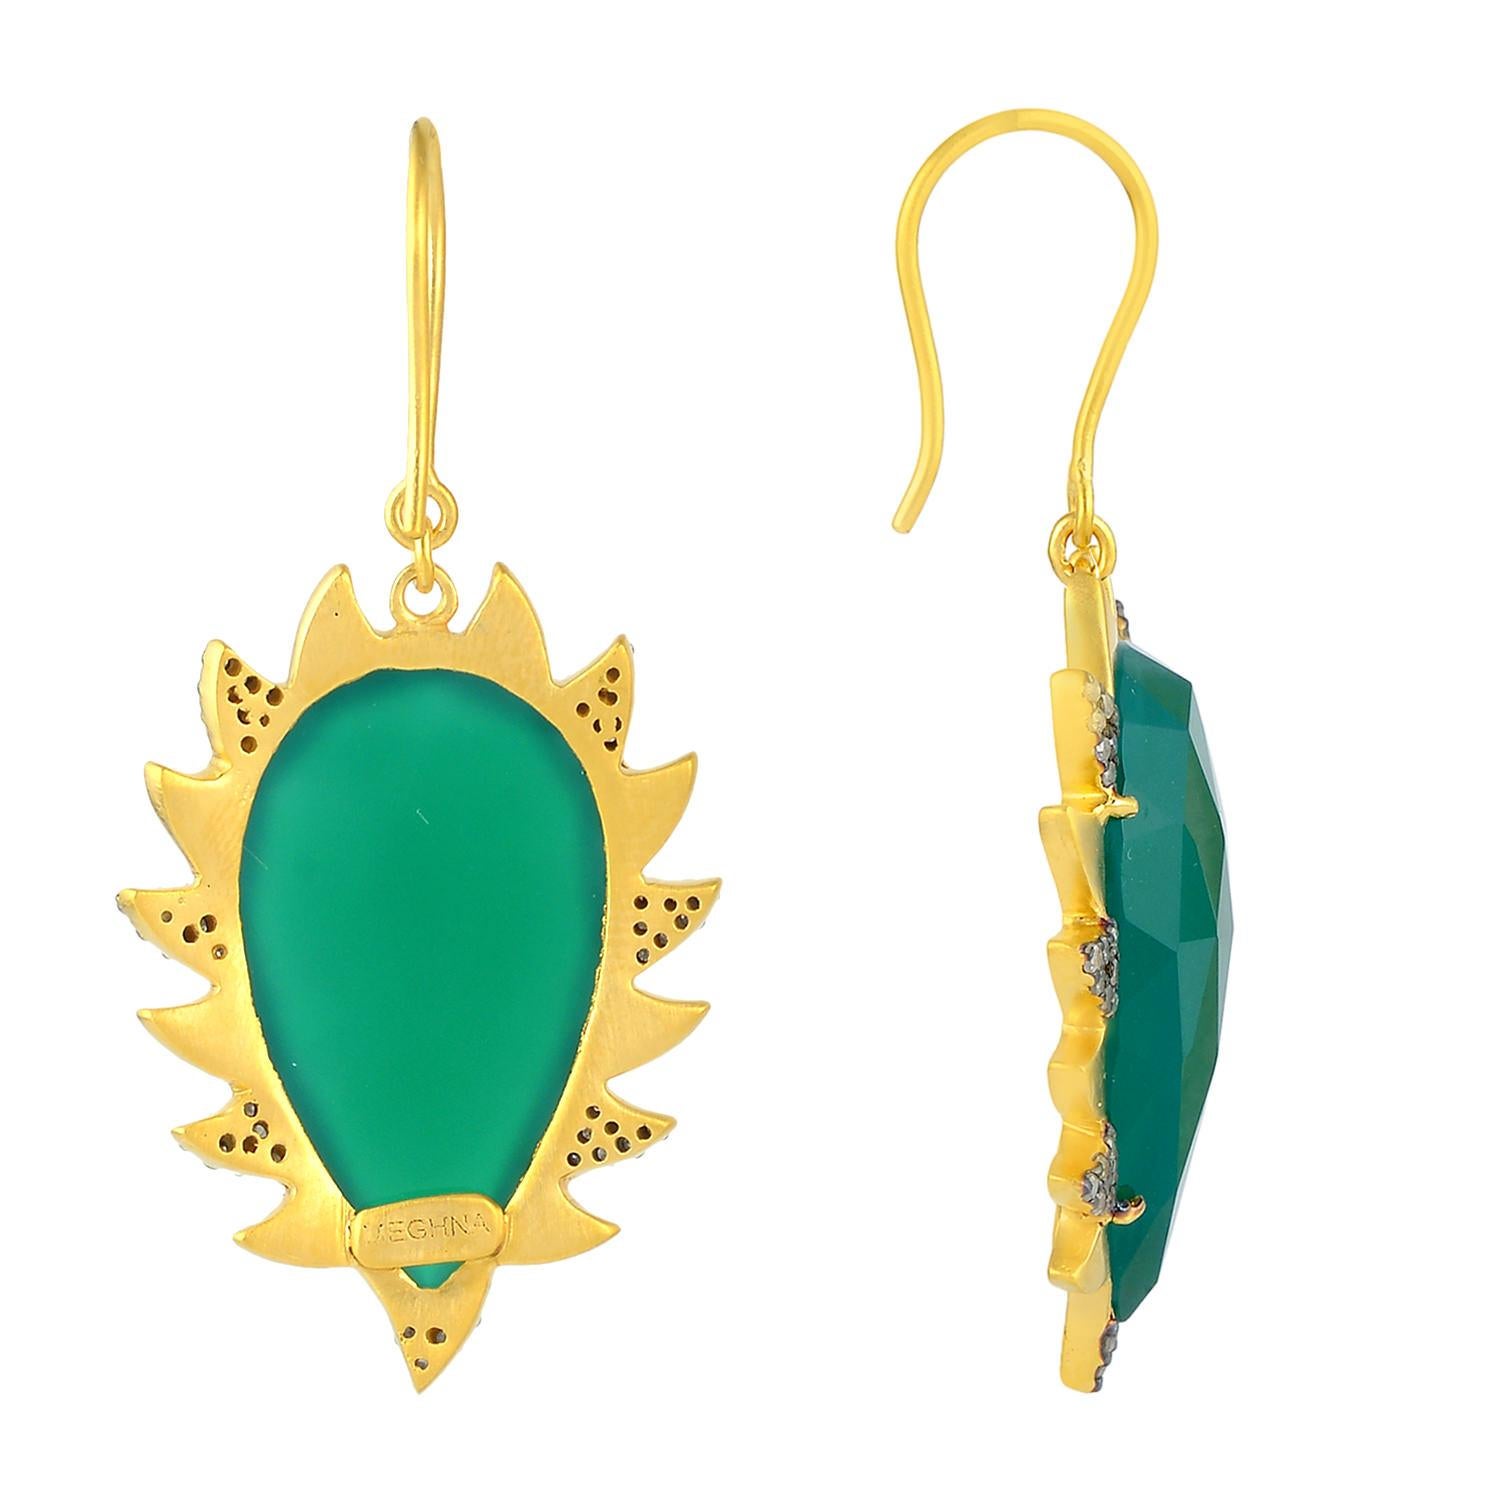  Cast in 18k gold and sterling silver. These beautiful claw earrings are handset in 27.45 carat green onyx and .50 carat of sparkling diamonds. Exquisitely framed in signature 